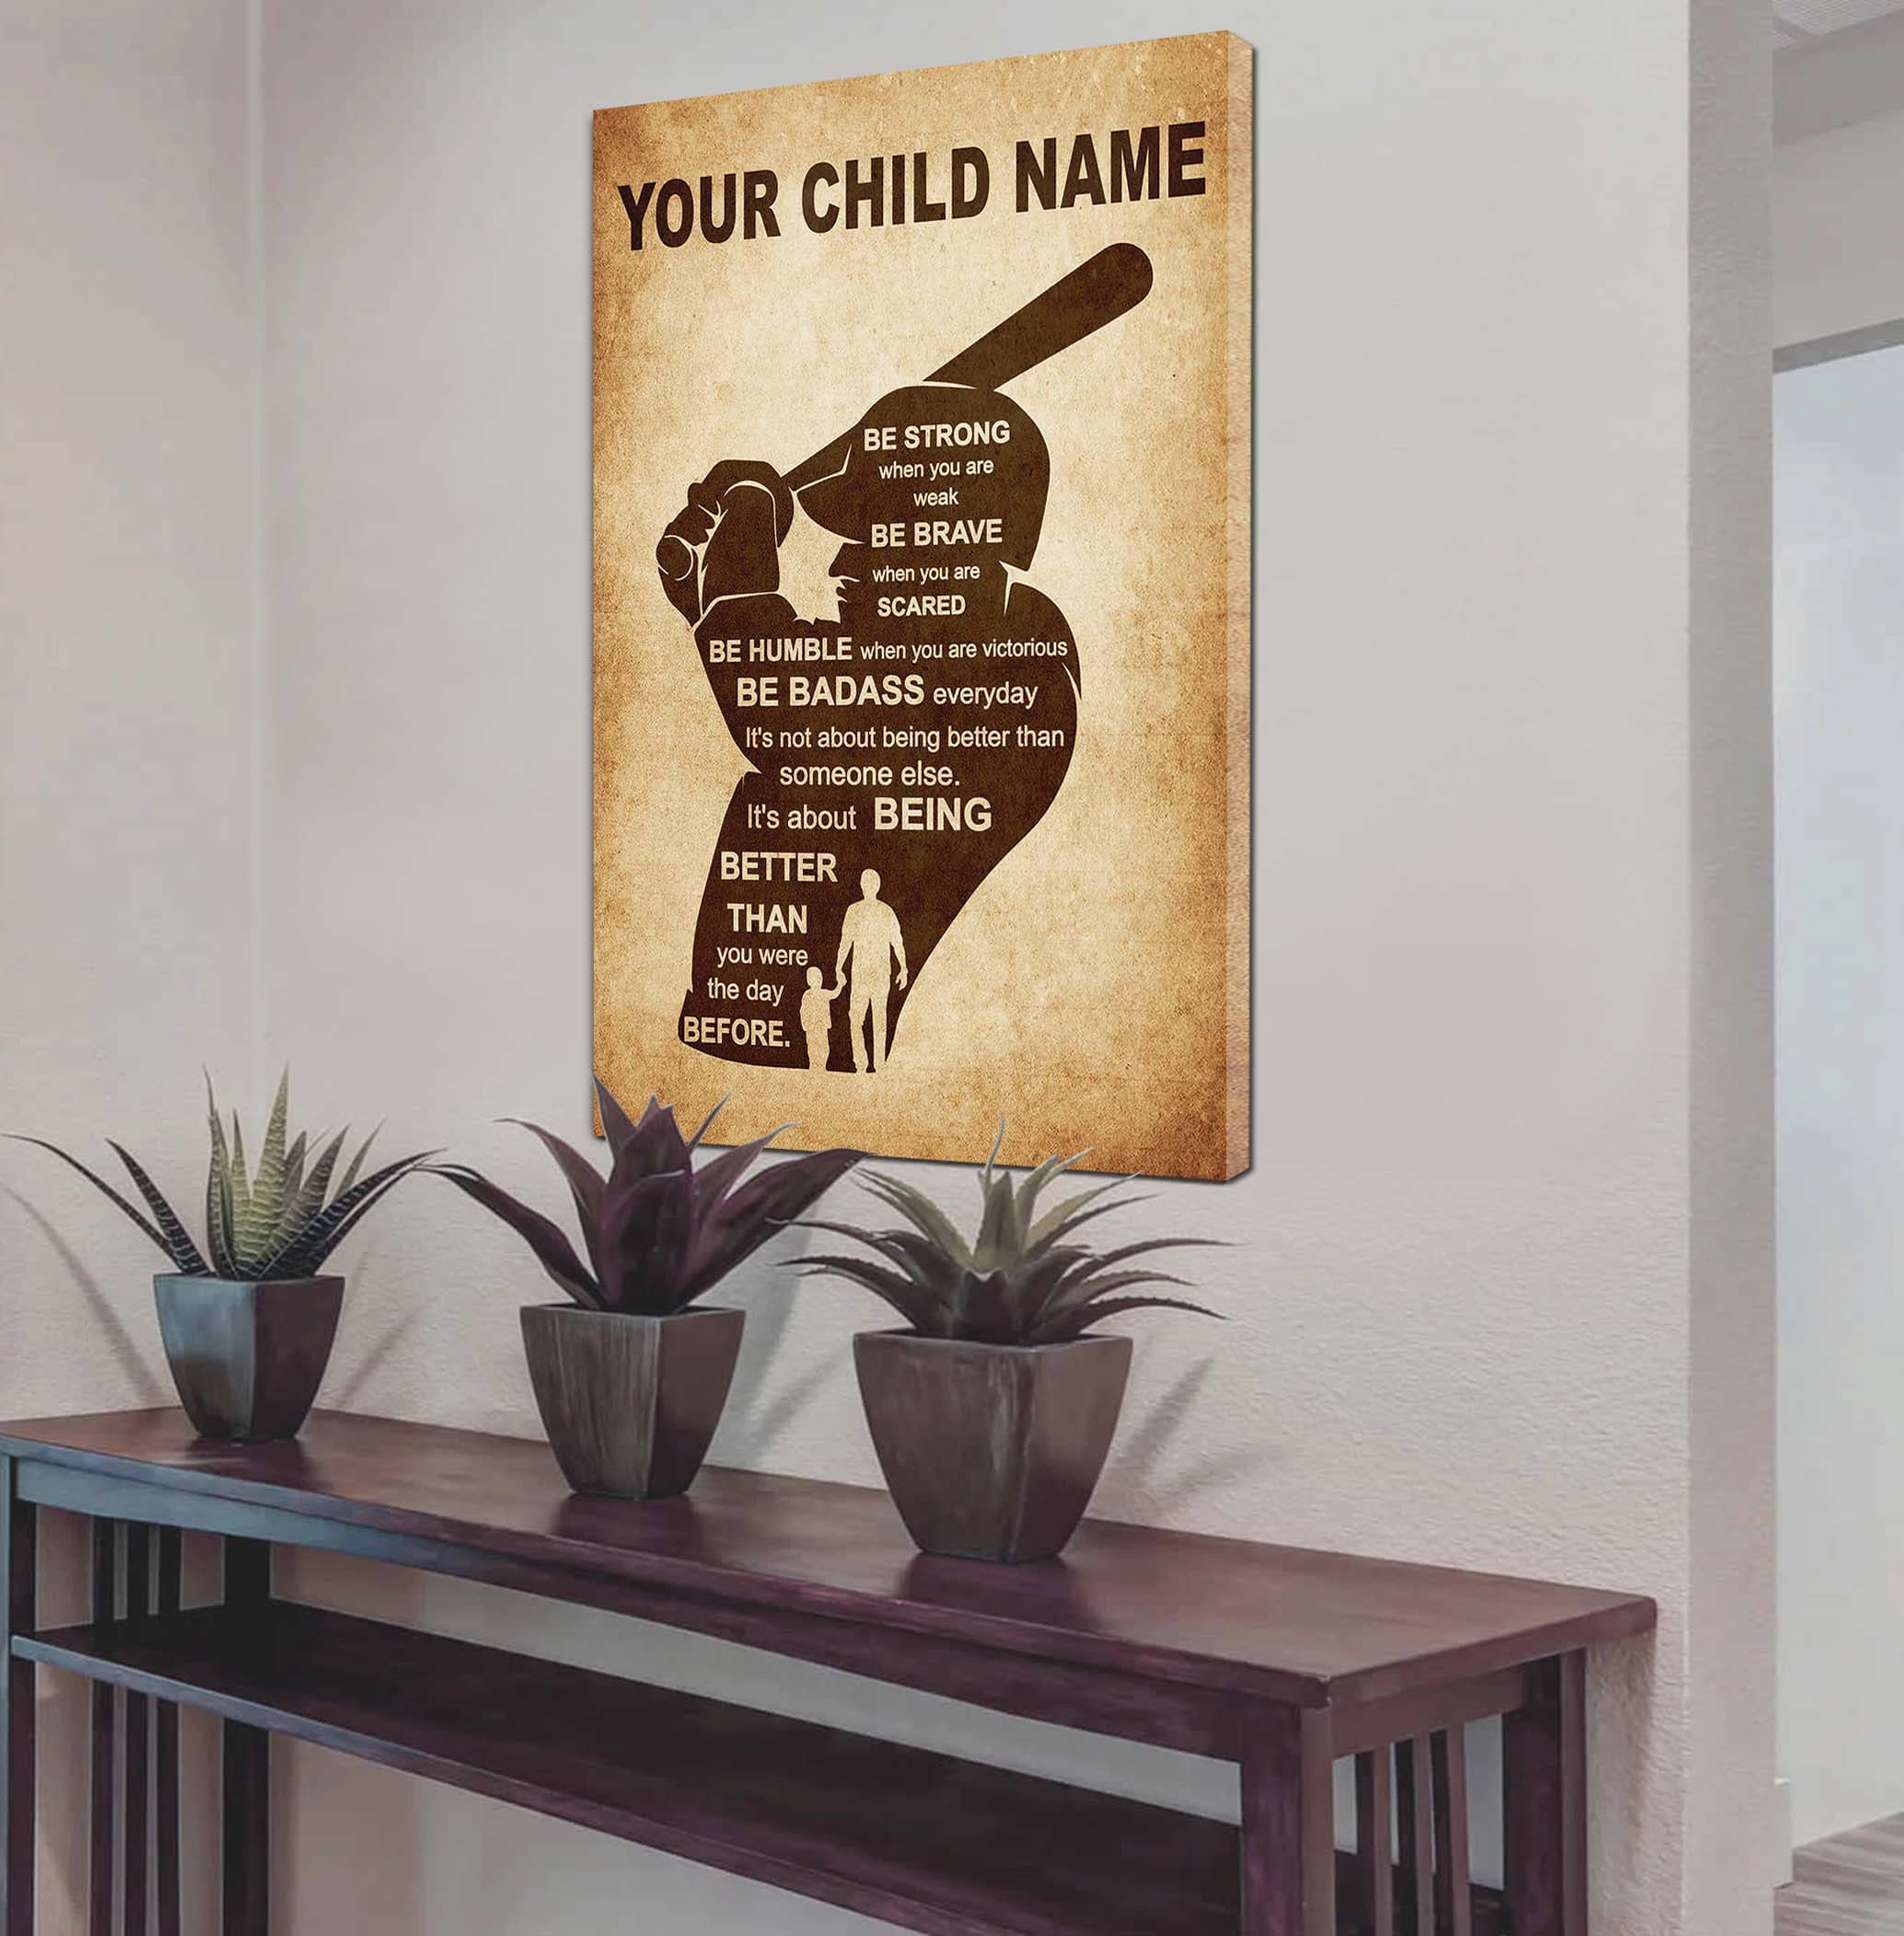 American Football Personalized Your Child Name From Dad To Son Basketball Poster Canvas Be Strong When You Are Weak Be Brave When You Are Scared It's Not About Being Better Than Someone Else It's About Being Better Than You Were The Day Before